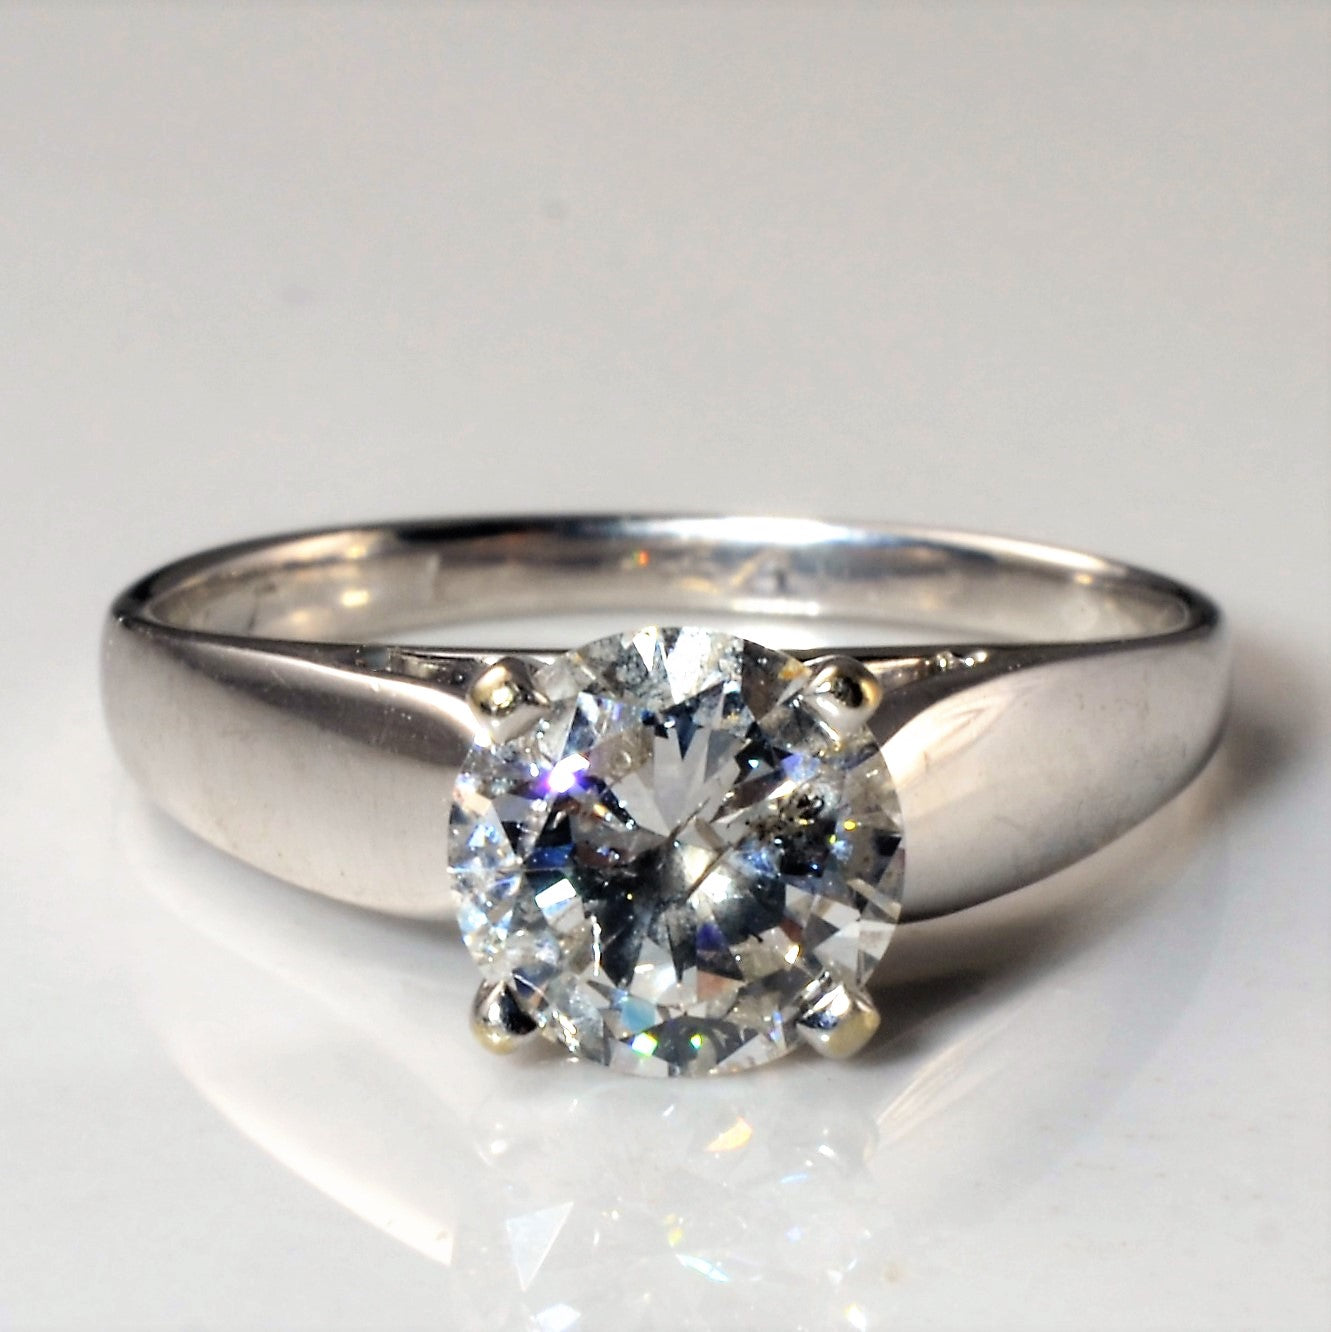 White Gold Solitaire Diamond Engagement Ring | 1.07ct | SZ 5 |